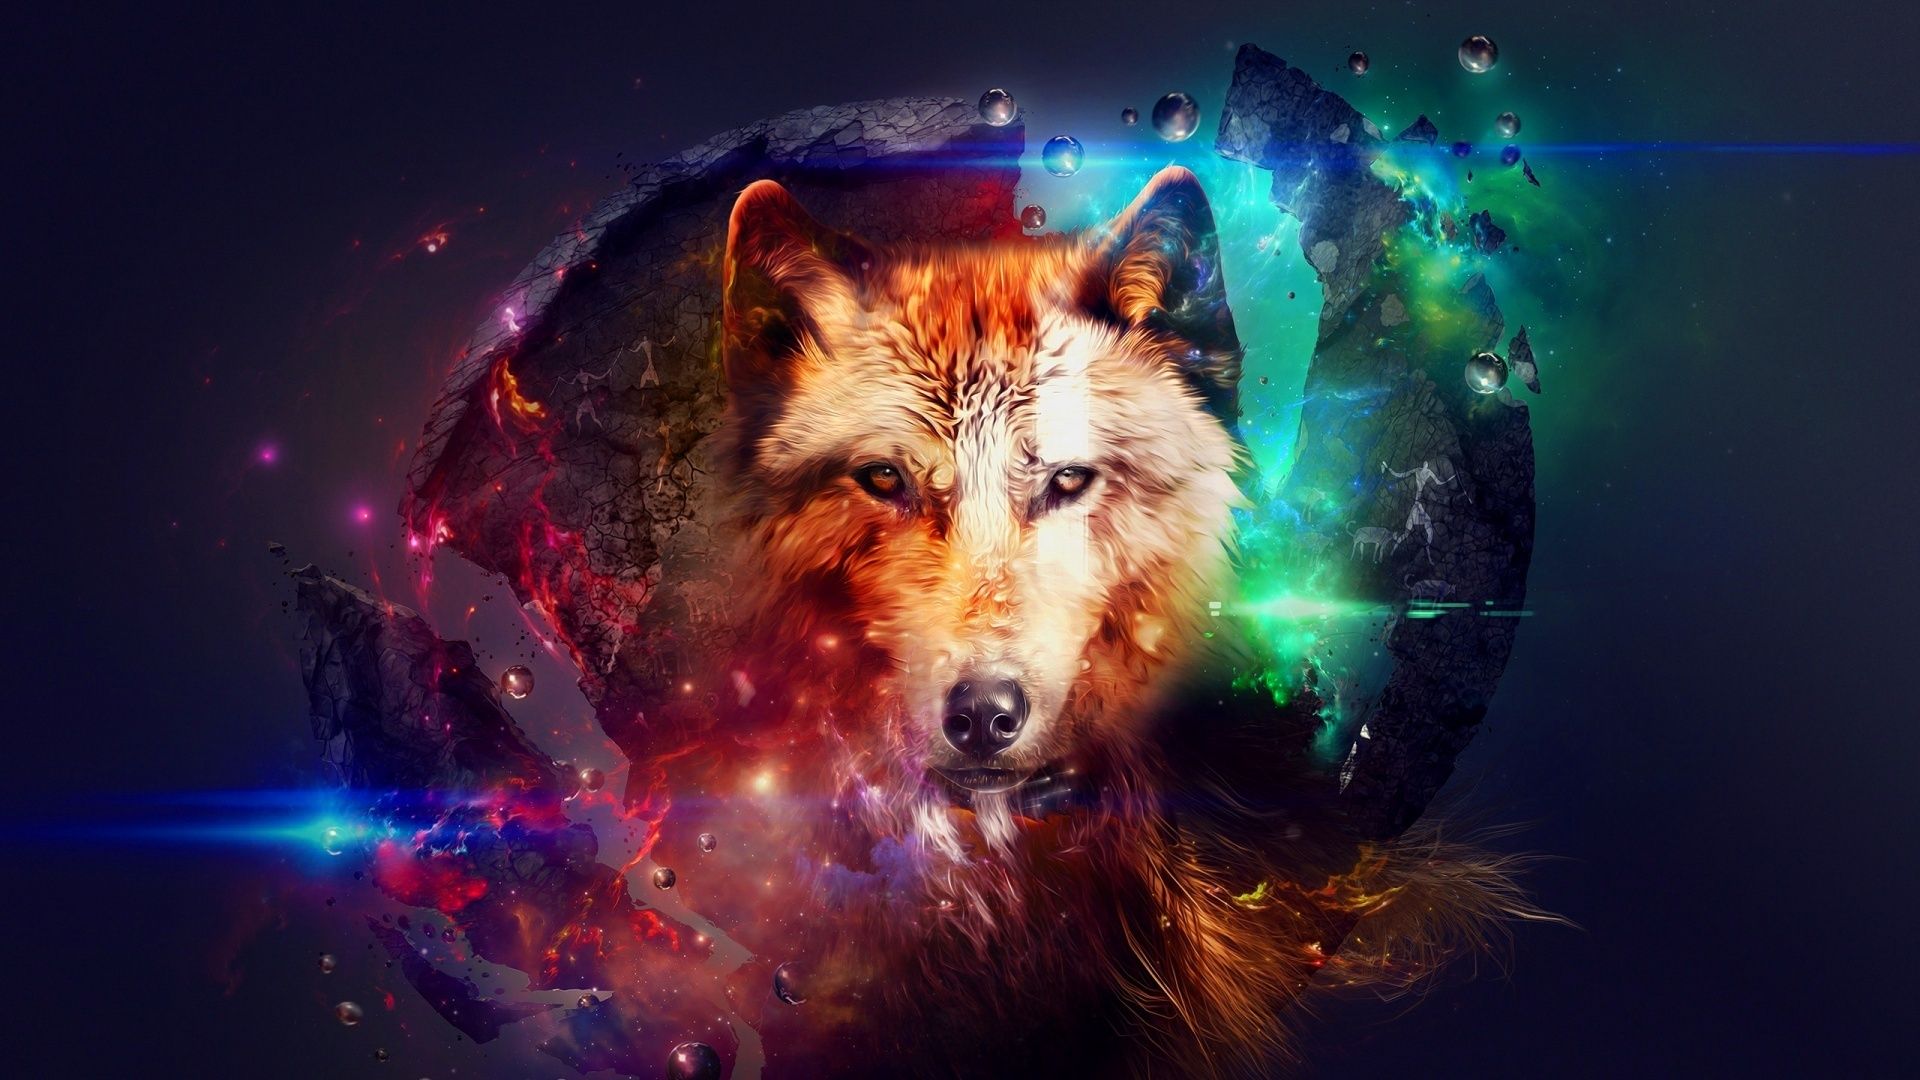 Wallpaper. Animals. photo. picture. wolf, wolf, space, rainbow